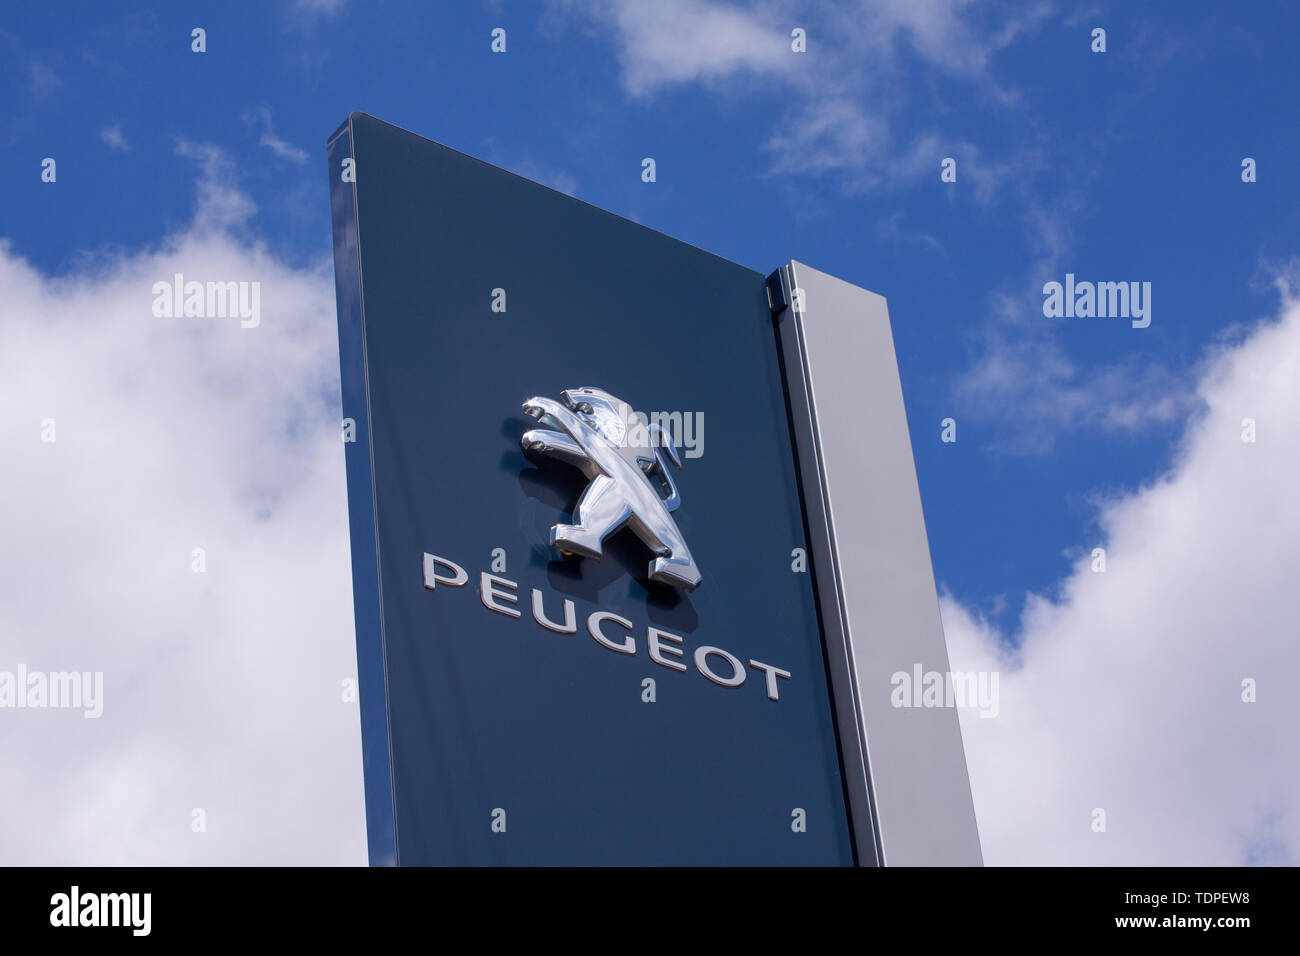 Sign with the logo of Peugeot. French automobile brand, part of Groupe PSA. Copenhagen, Denmark - June 17, 2019 Stock Photo